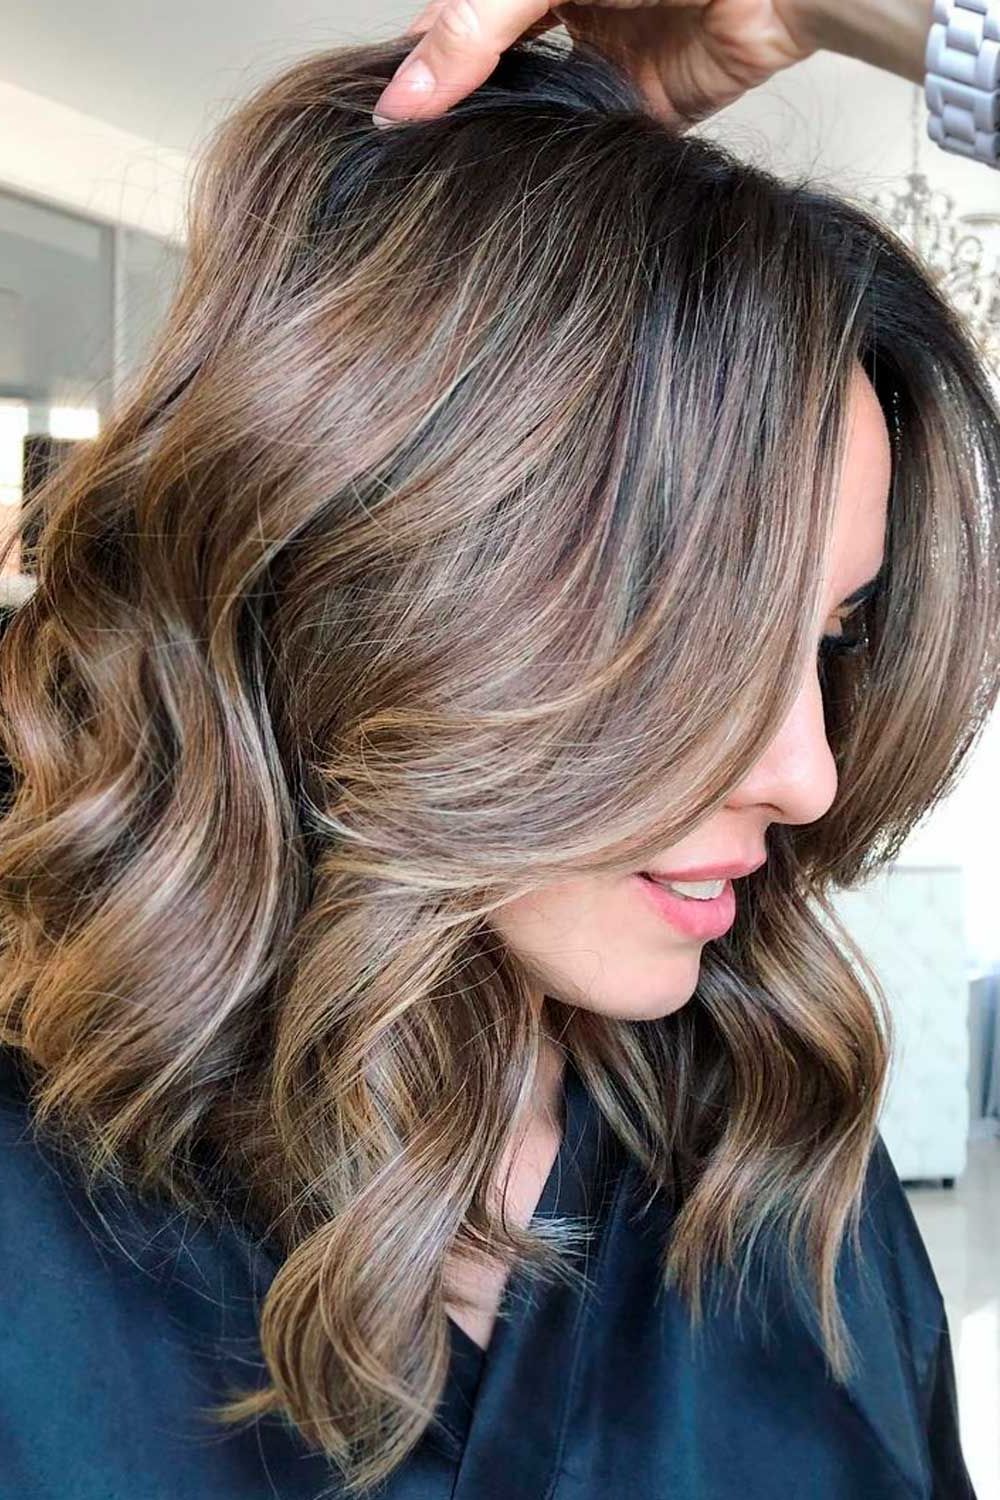 Untraditional Lob Haircut Ideas To Give A Try | Lovehairstyles Throughout Most Up To Date Long Bob Haircuts With Highlights (Photo 25 of 25)